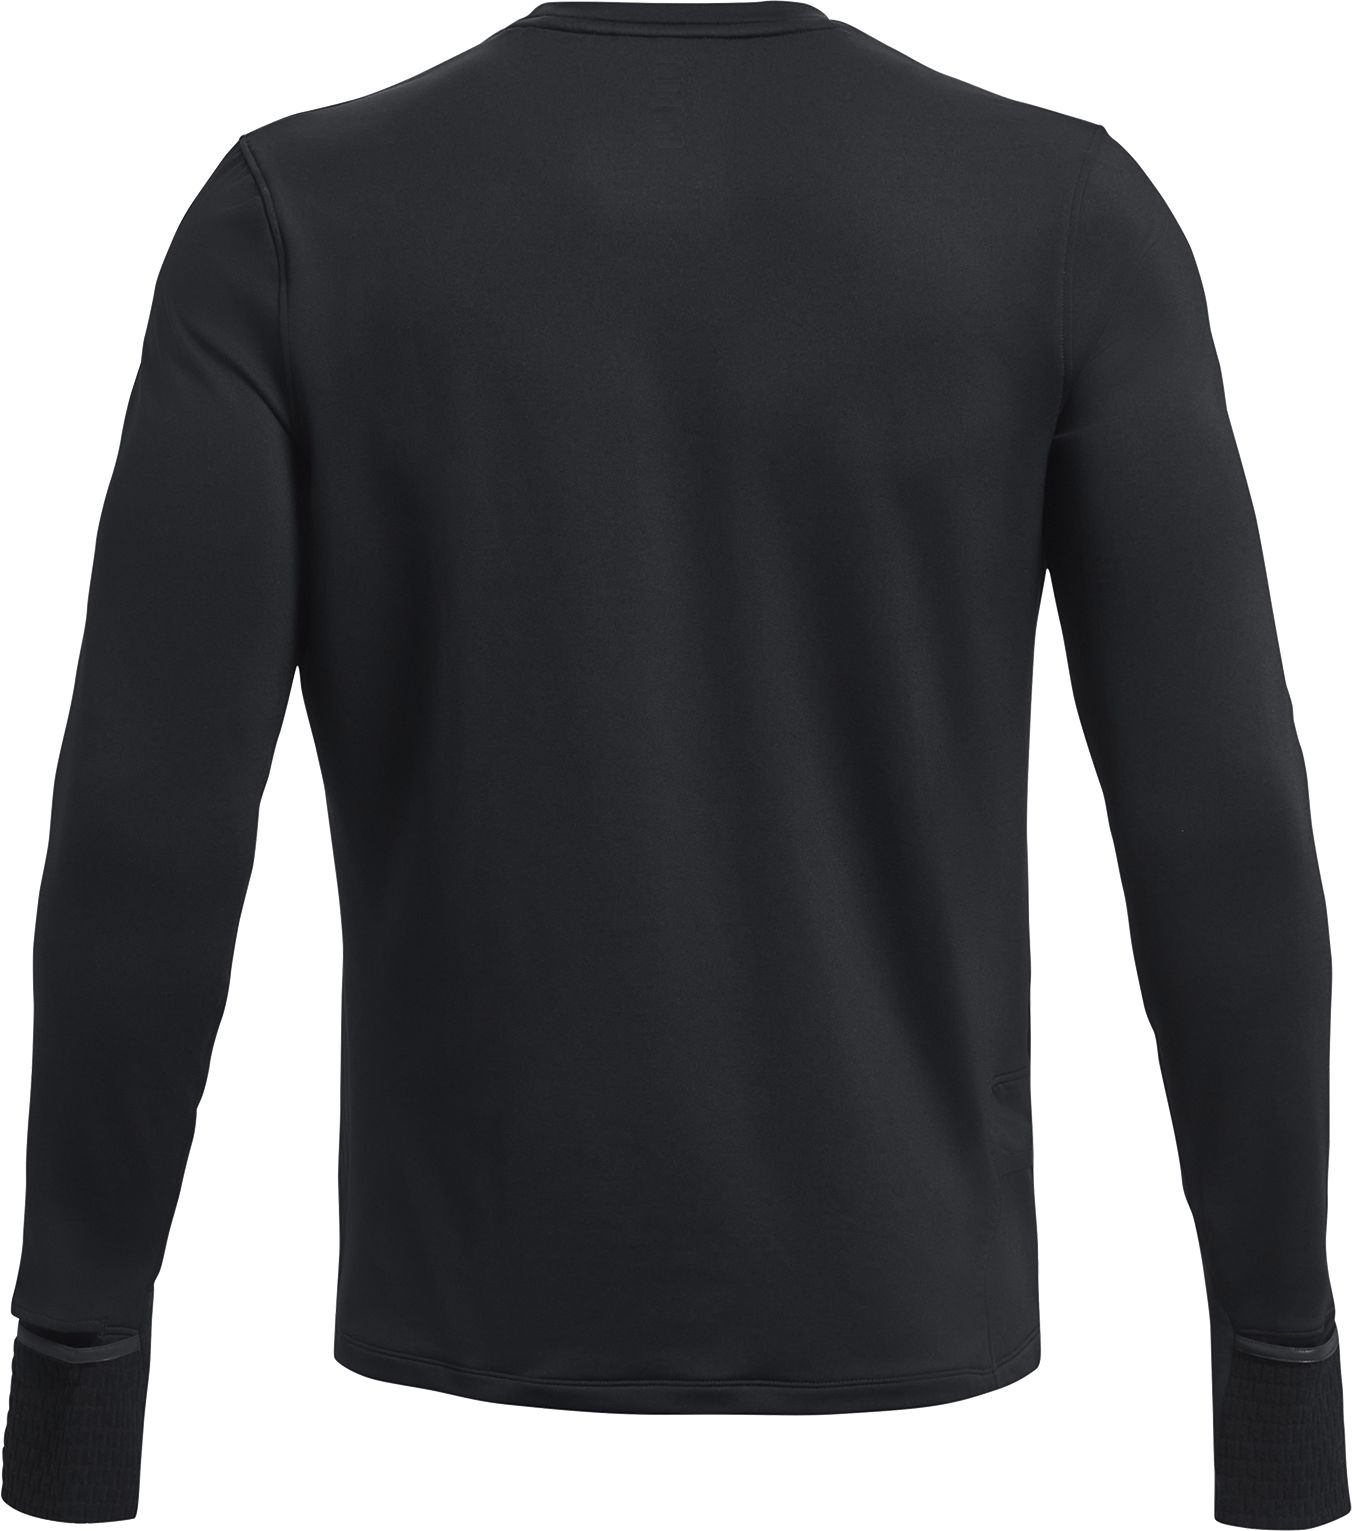 UNDER ARMOUR, QUALIFIER COLD LONGSLEEVE